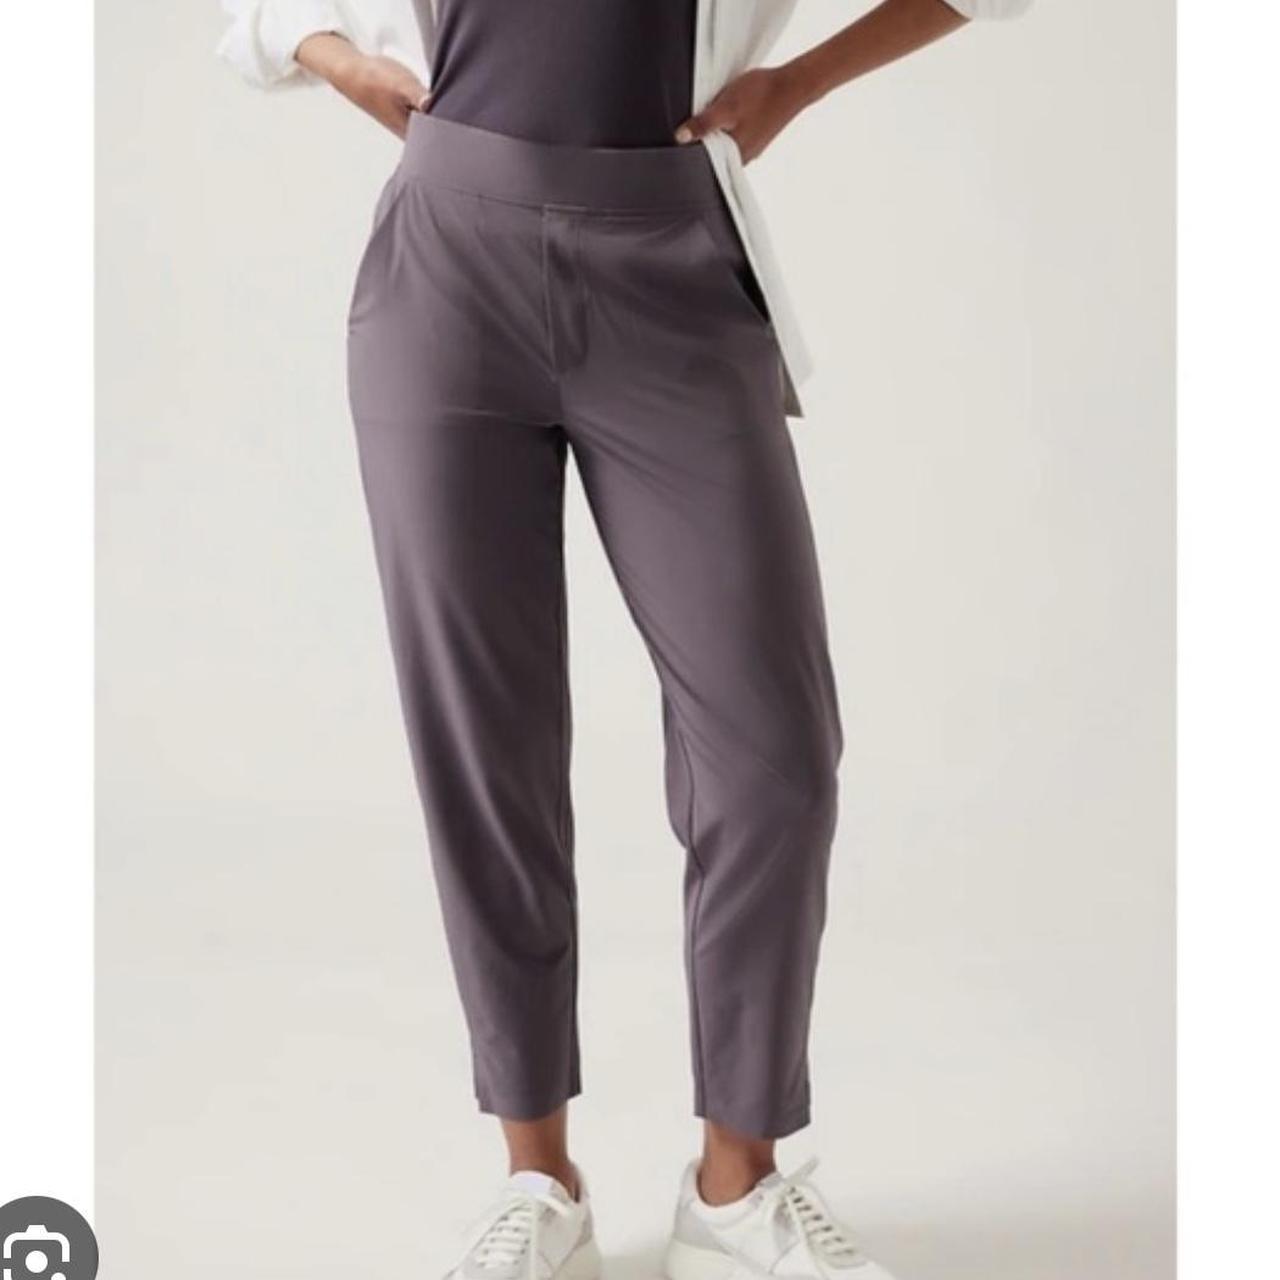 Athleta Endless High Rise Pant Size 6 I adore these - Depop